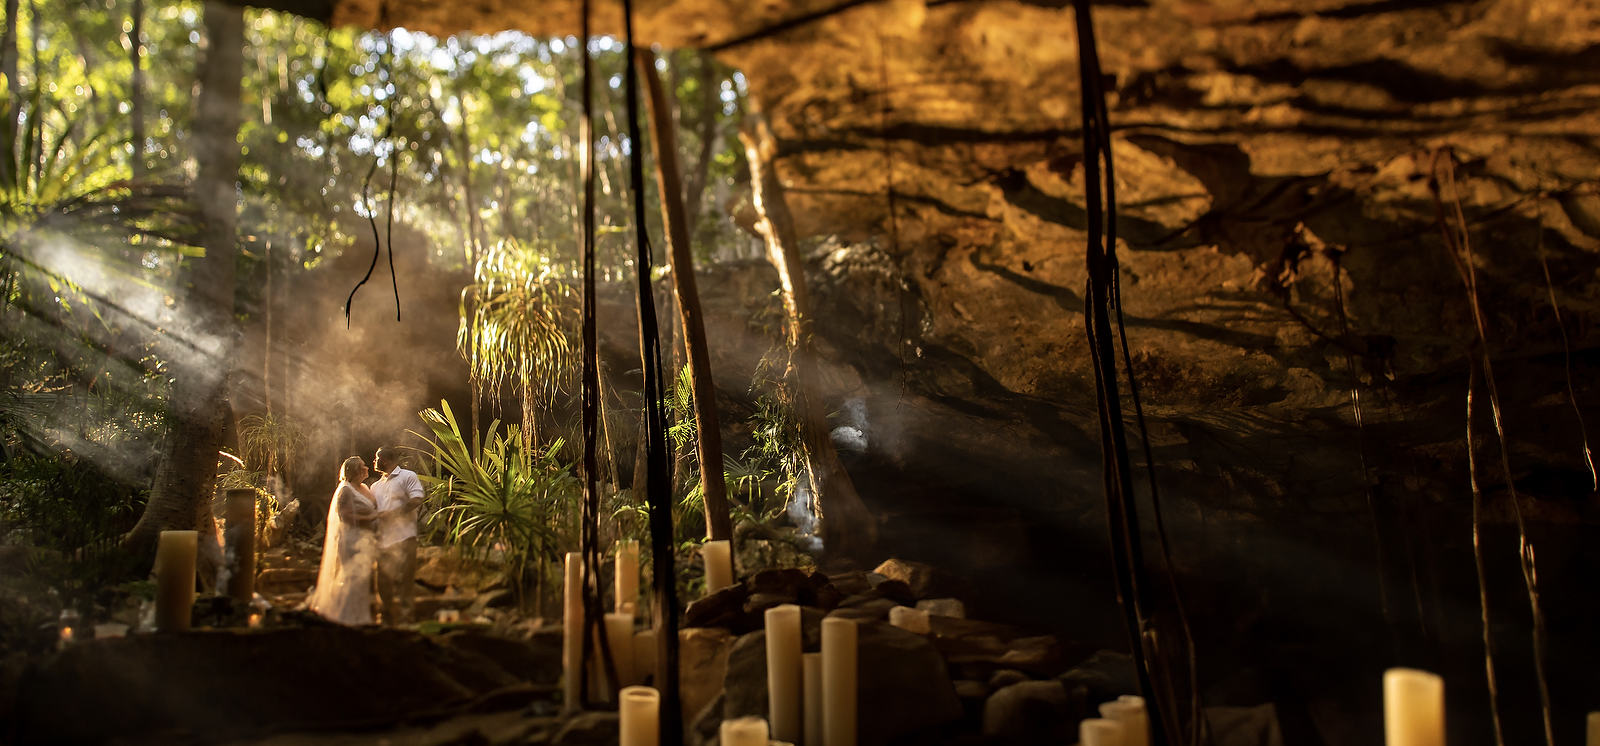 Bride and groom in a cenote with candles and beautiful lighting in Mexico for a micro wedding ceremony